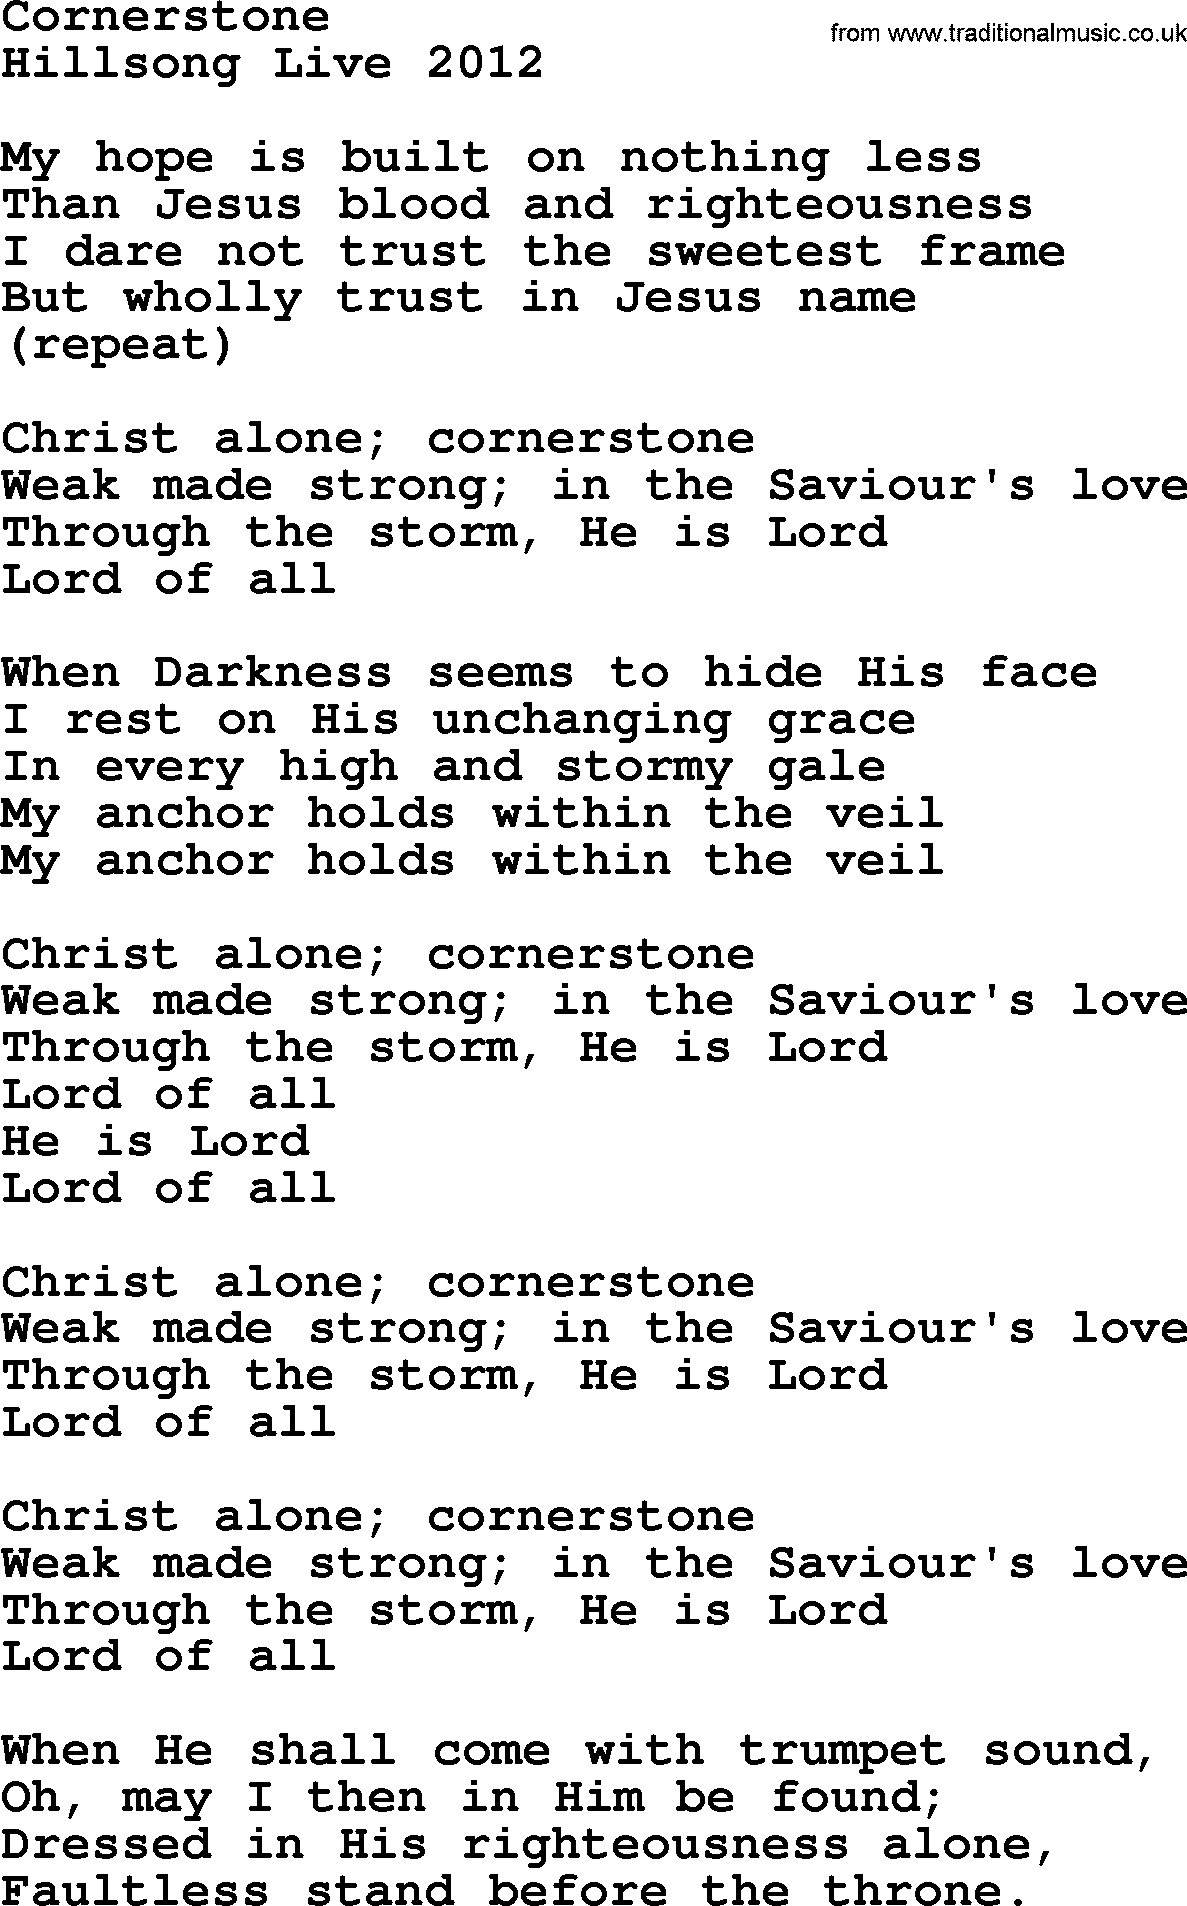 A collection of 500+ most sung Christian church hymns and songs, title: Cornerstone~, lyrics, PPTX and PDF